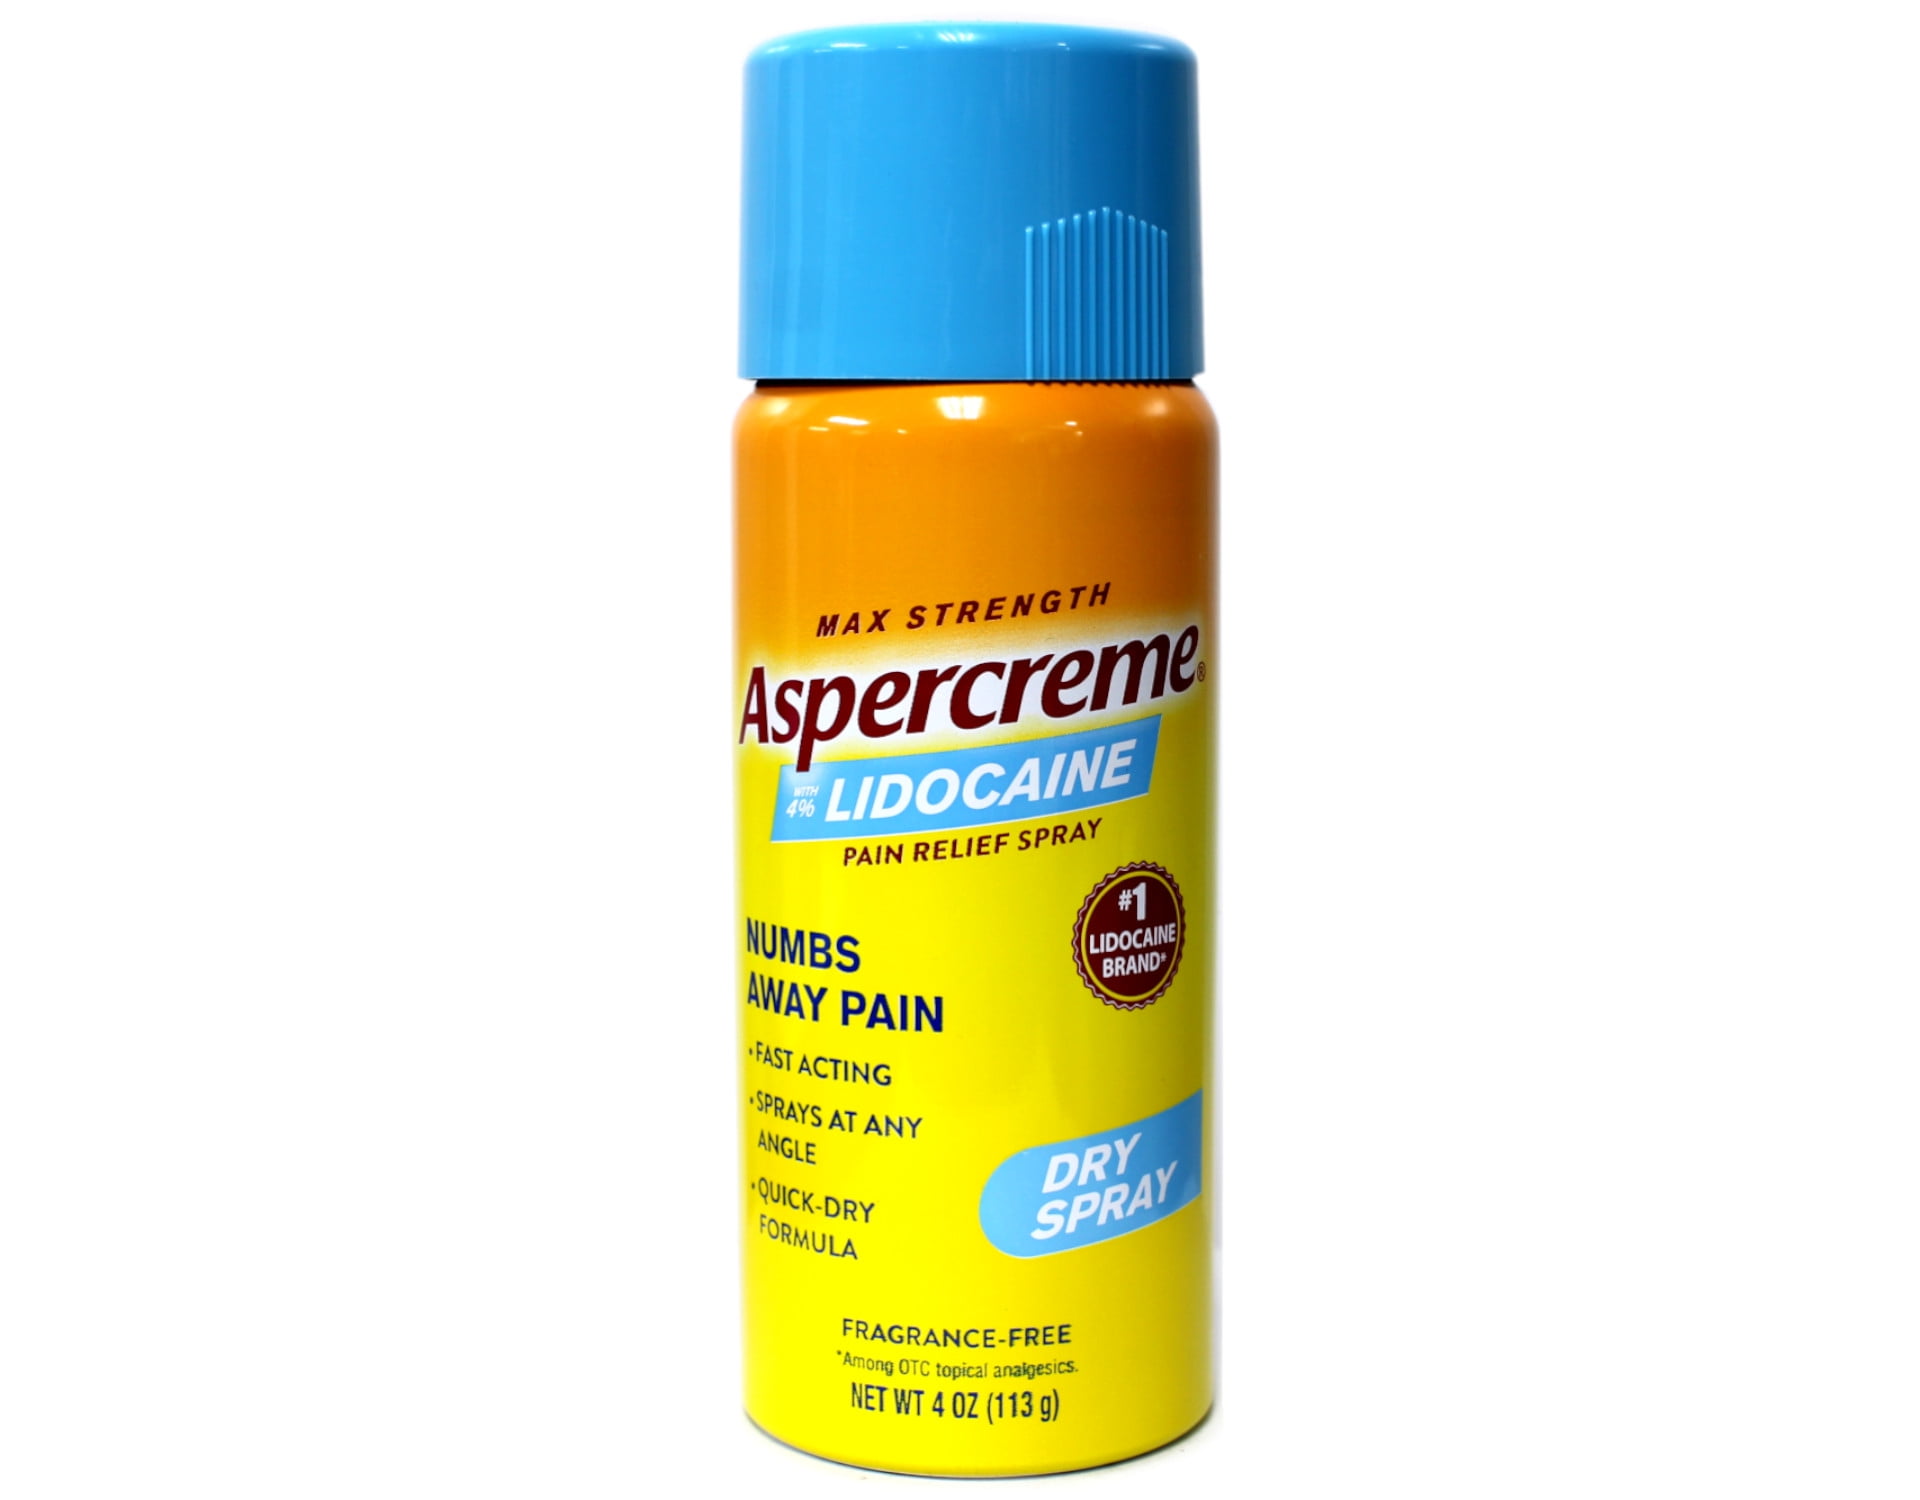 Buy Aspercreme with Lidocaine Maximum Strength Pain Relief Cream 27 oz  Online at Lowest Price in Ubuy India B00U52SM8A